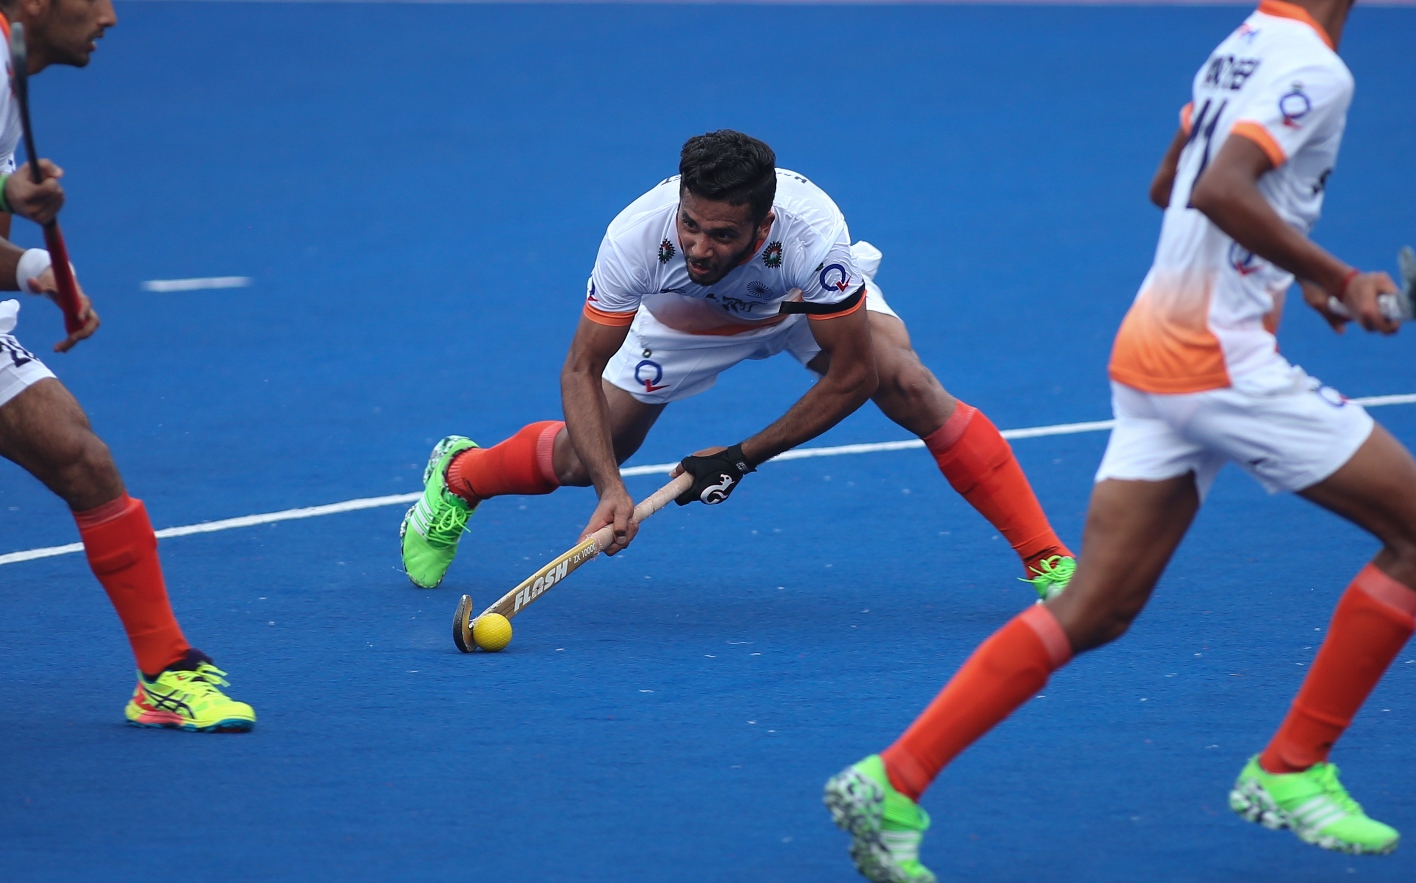 Hockey | India's tour of Europe | India start their campaign with a 1-0 loss to Belgium